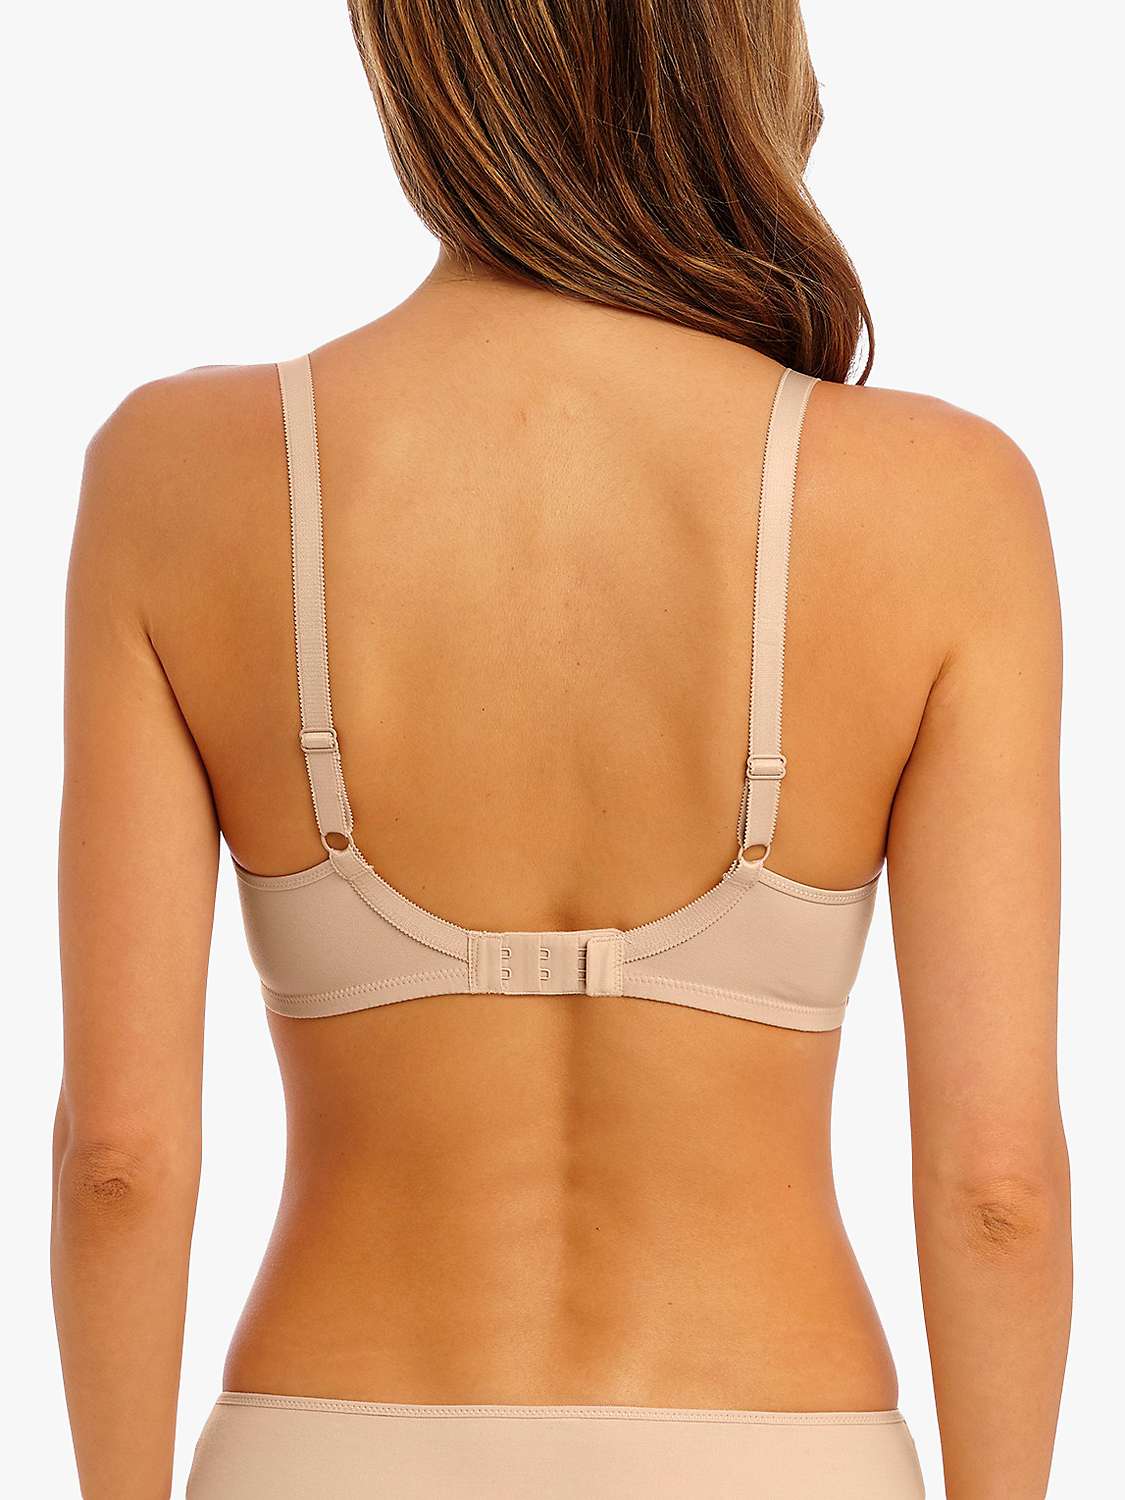 Buy Wacoal Lisse Underwired Seamless Lace Bra Online at johnlewis.com